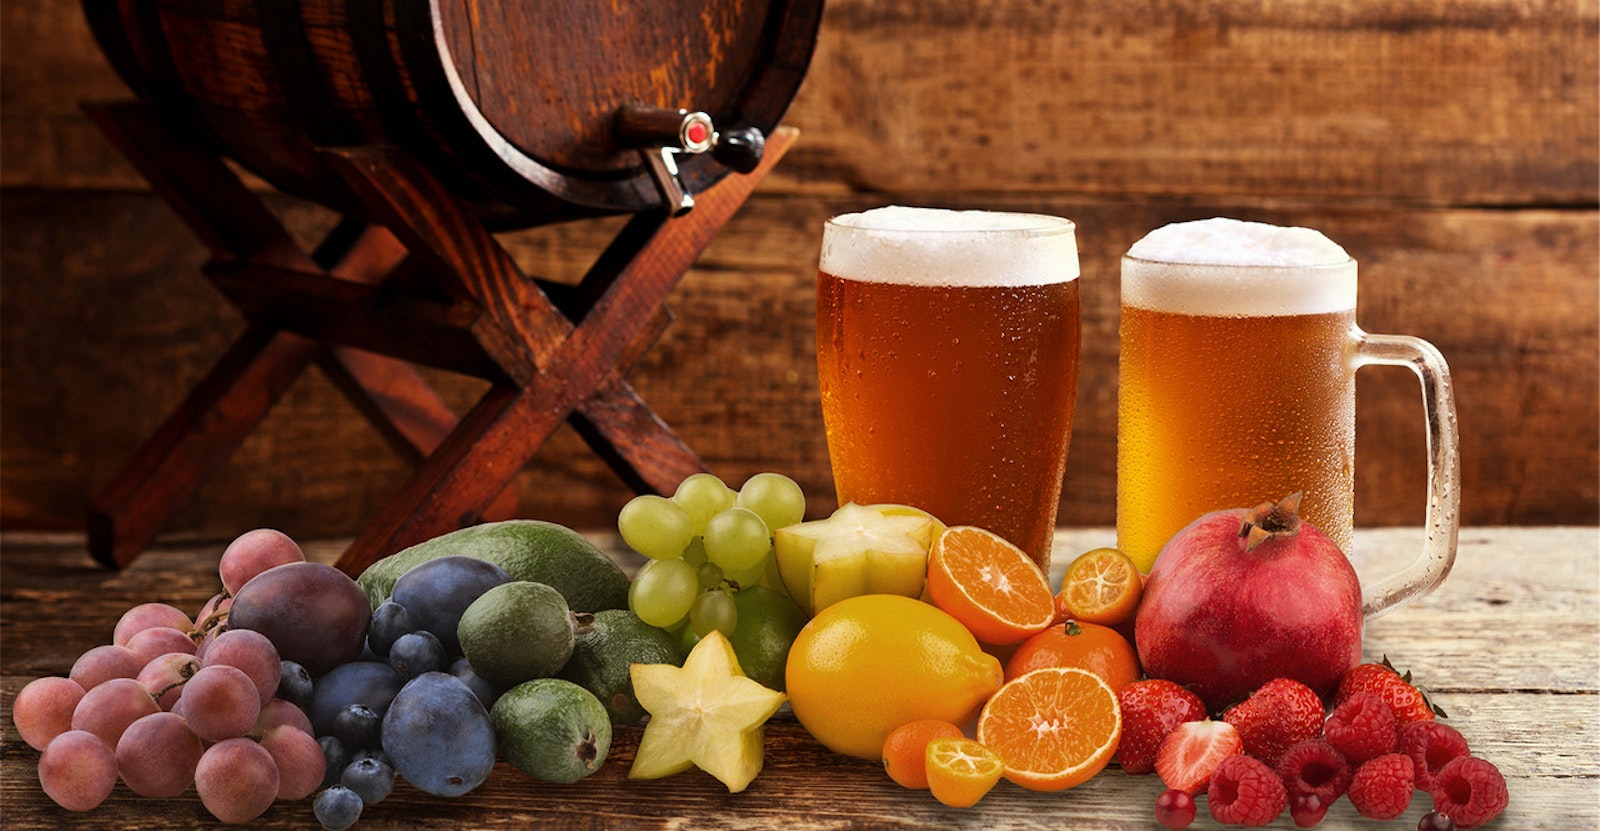 Fruit Beer Market Size 2022: Share, Industry Trends, Analysis, Growth Rate, and Forecast Report 2027